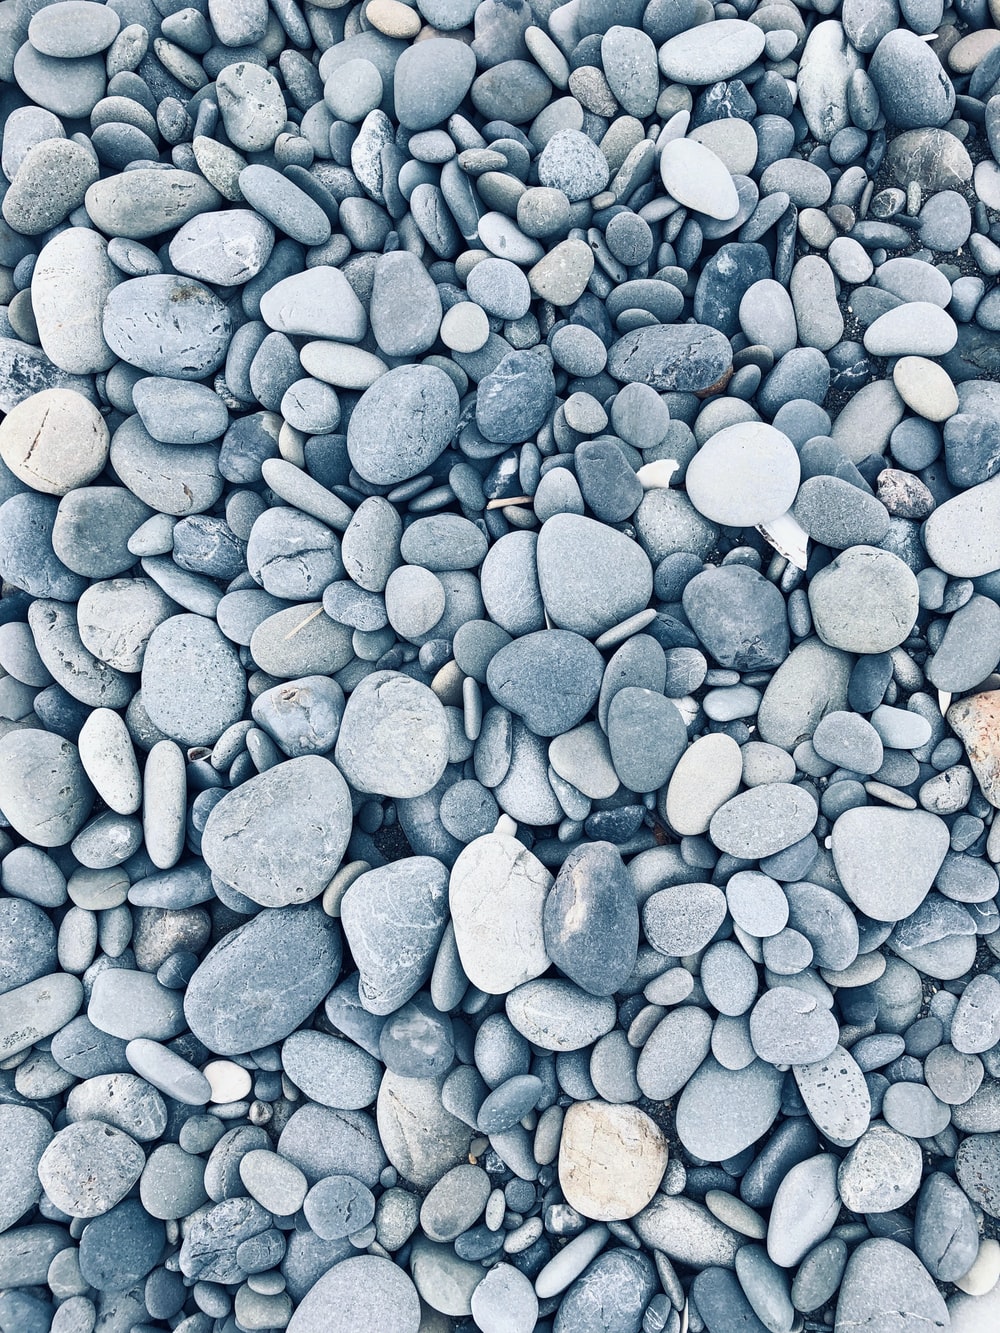 Pebble Picture. Download Free Image